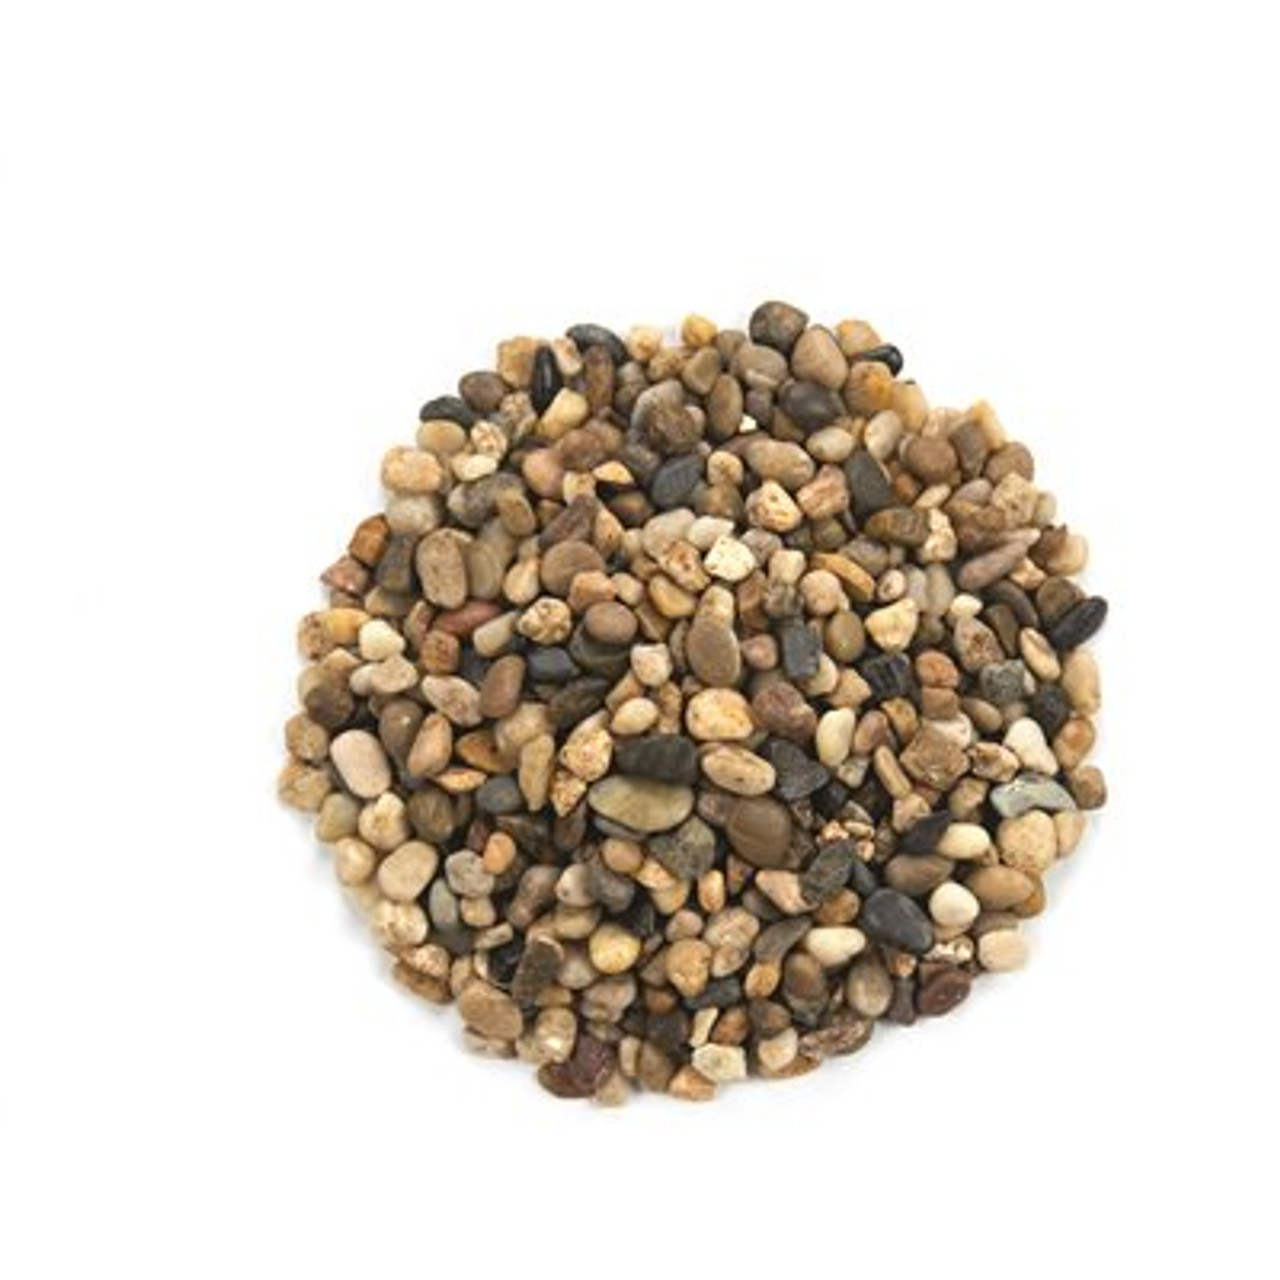 Msi Mixed Polished Pebbles 0.5 Cu. Ft . Per Bag (0.25 In. To 0.5 In.) Bagged Landscape Rock (55 Bags / Covers 22.5 Cu. Ft.)